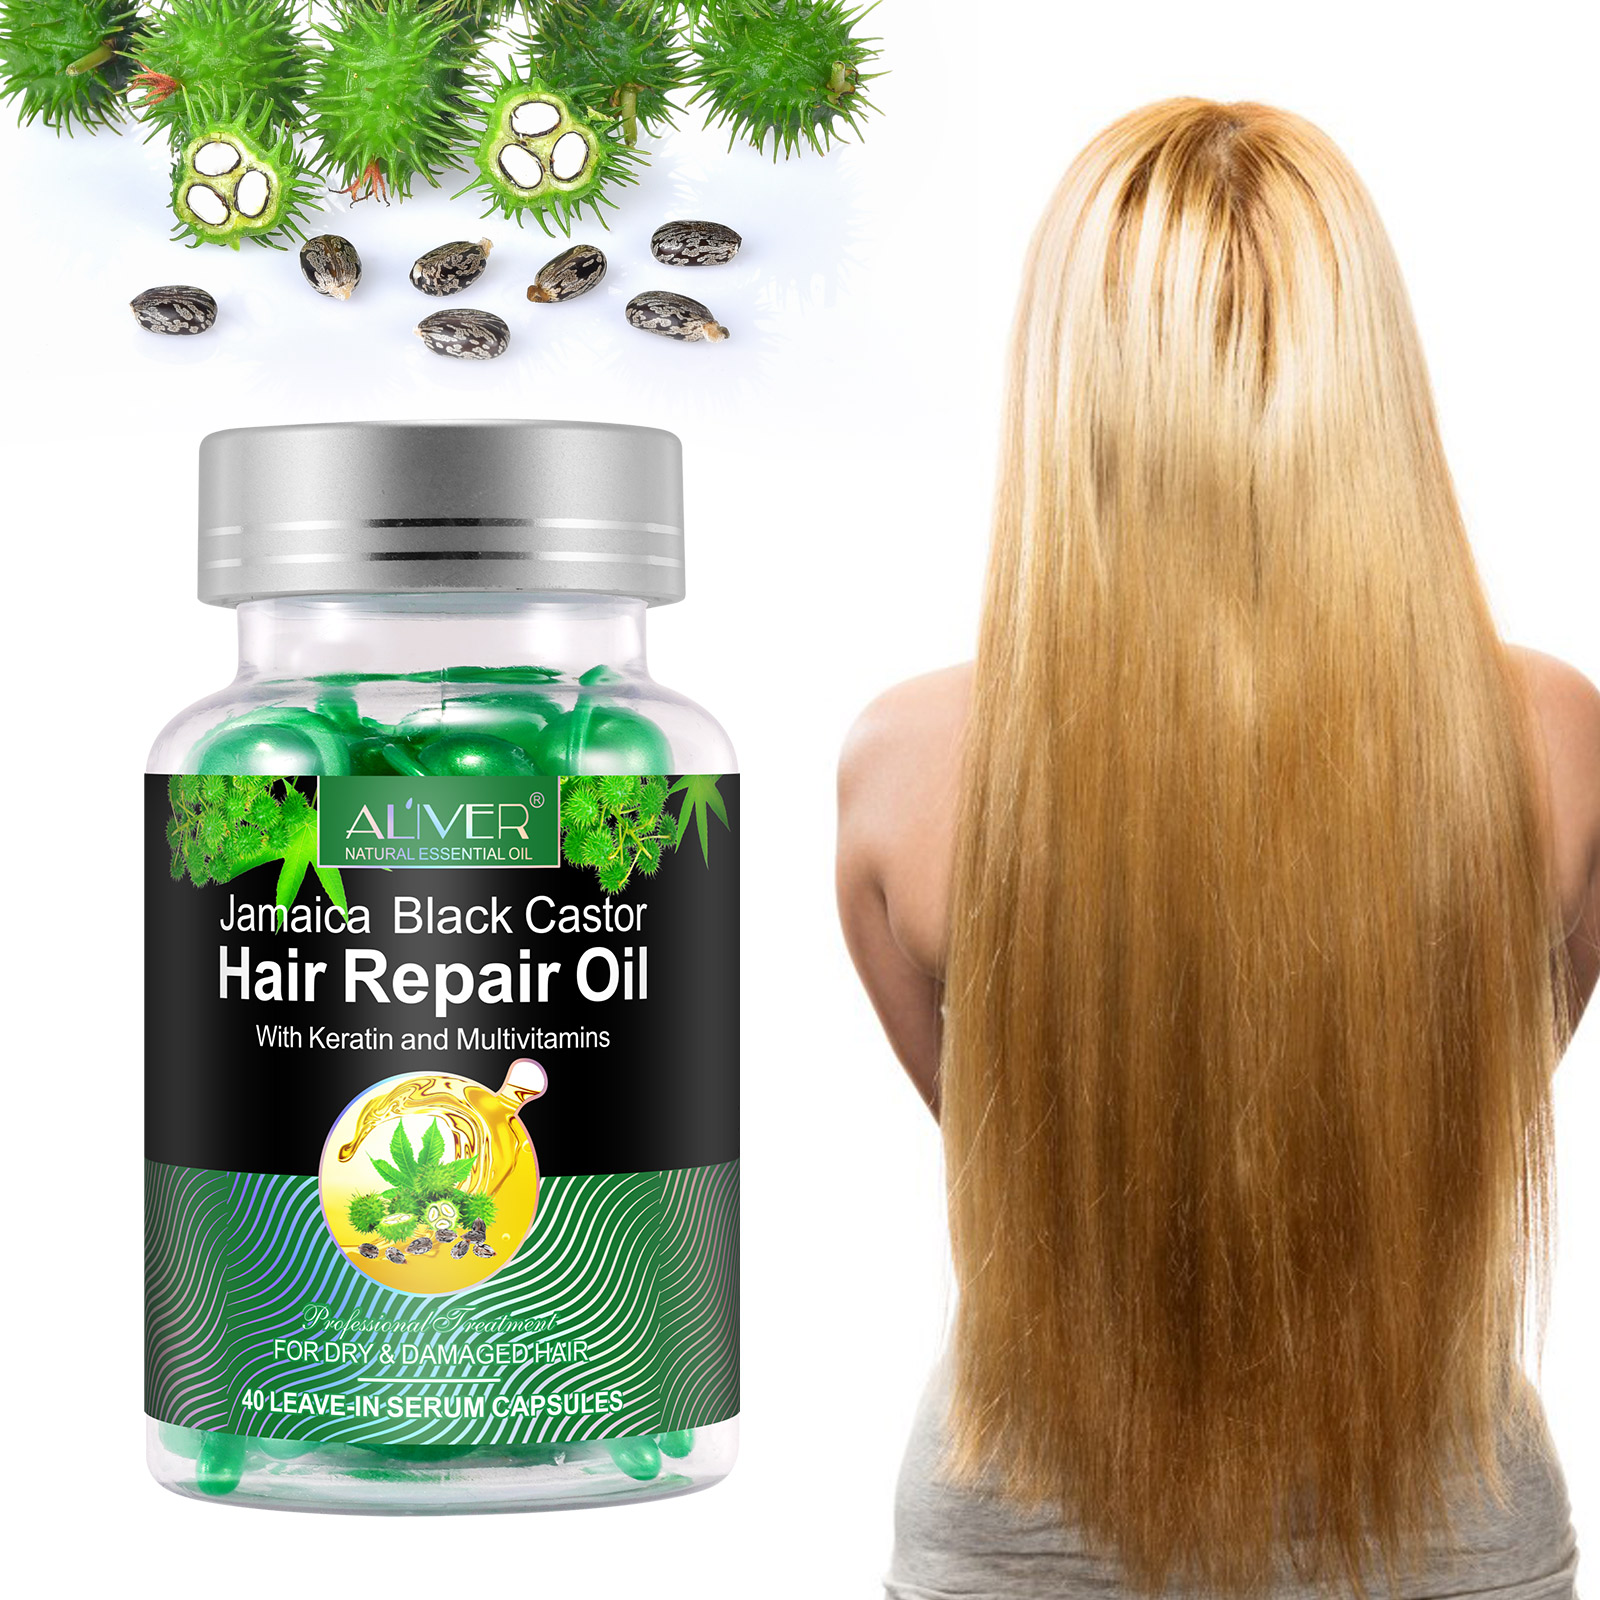 Castor Oil Hair Growth Capsules by Aliver, 40 Leave-in Serum Capsules ...